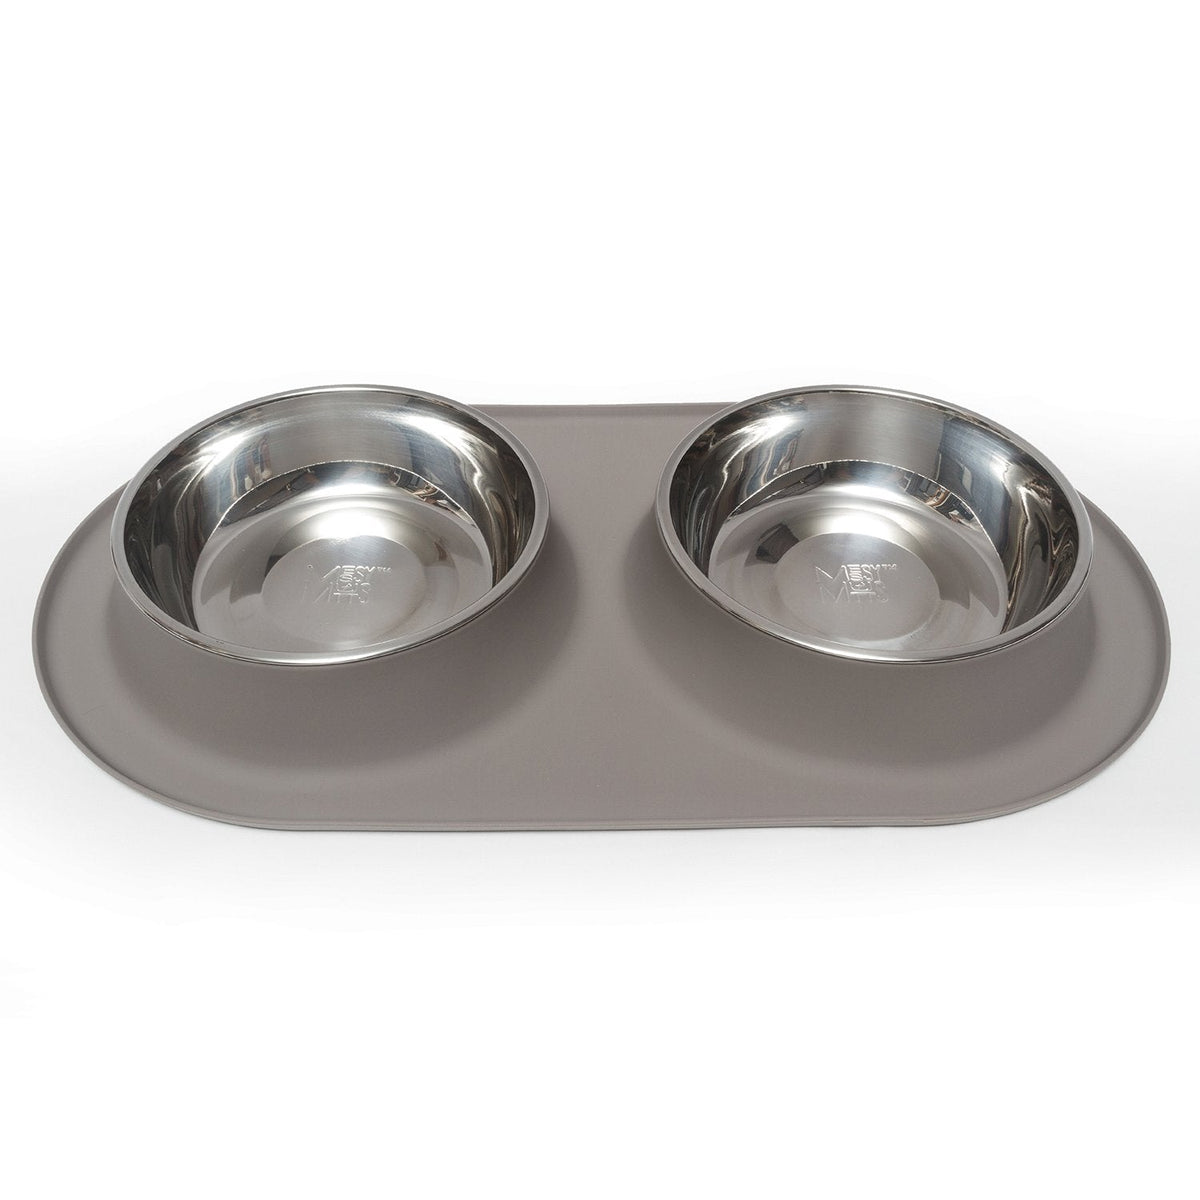 MESSY MUTTS DOUBLE FEEDER 1.5 CUP GREY-Four Muddy Paws